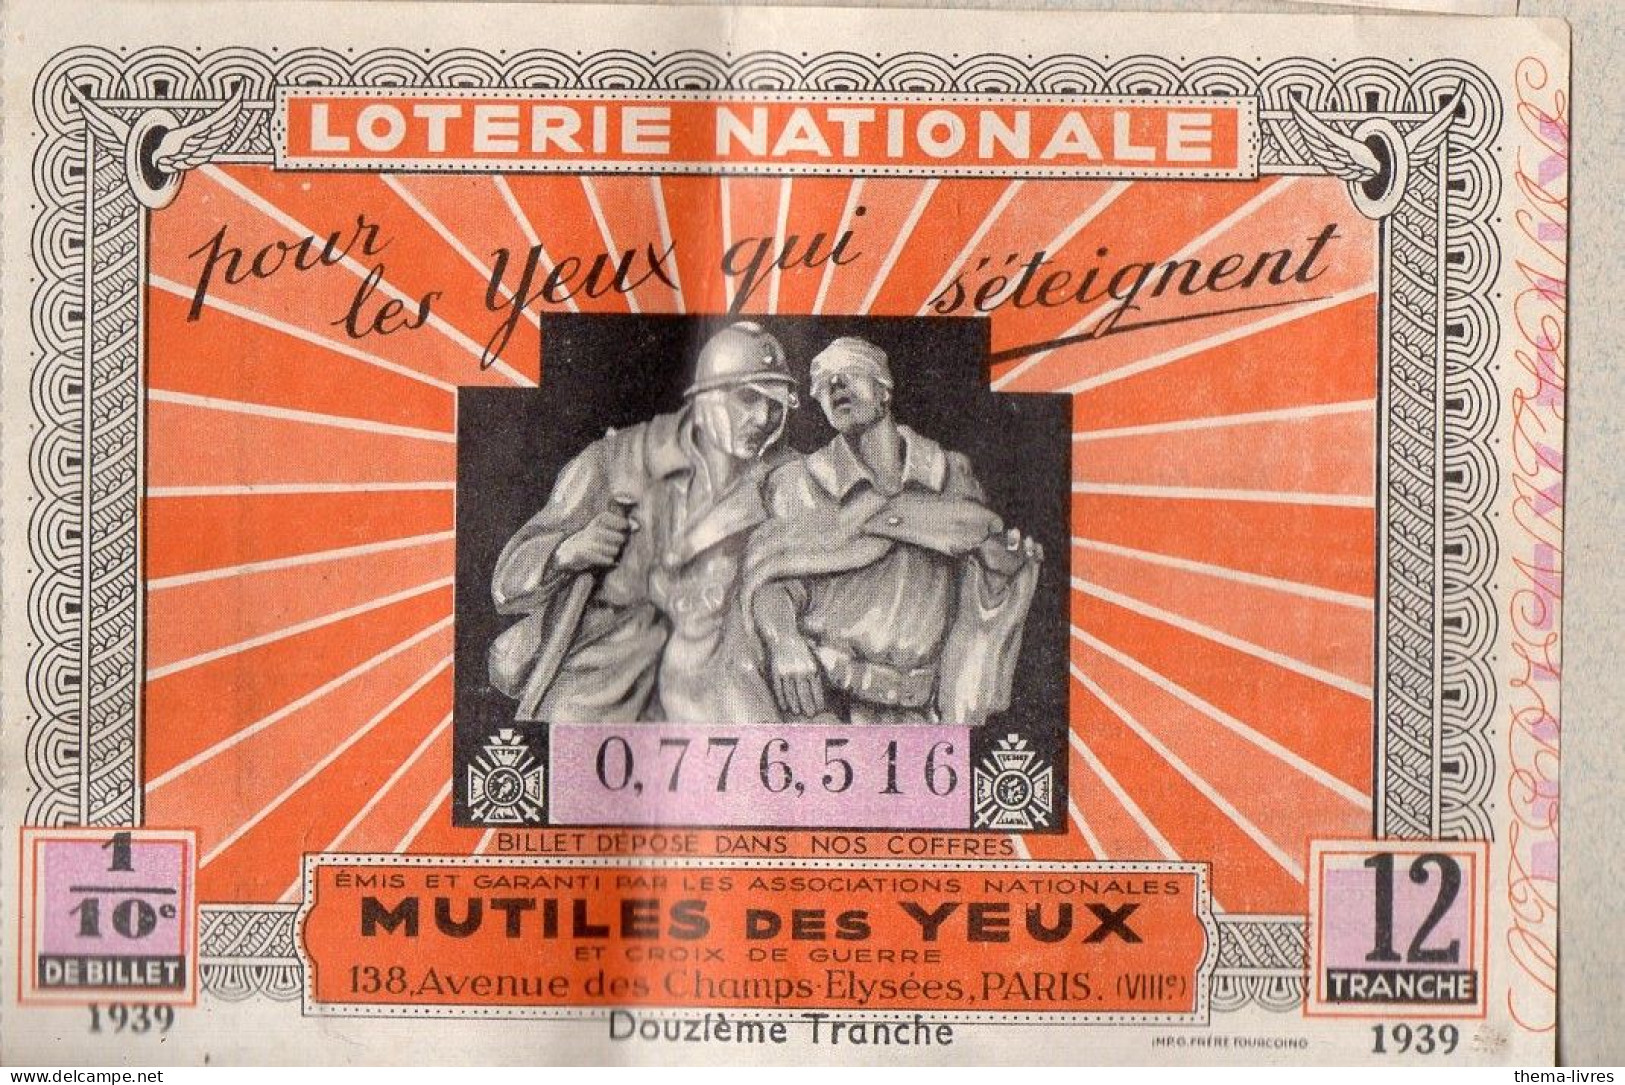 Billet LOTERIE NATIONALE 1939 MUTILES DES YEUX    (PPP46912 /C) - Lottery Tickets